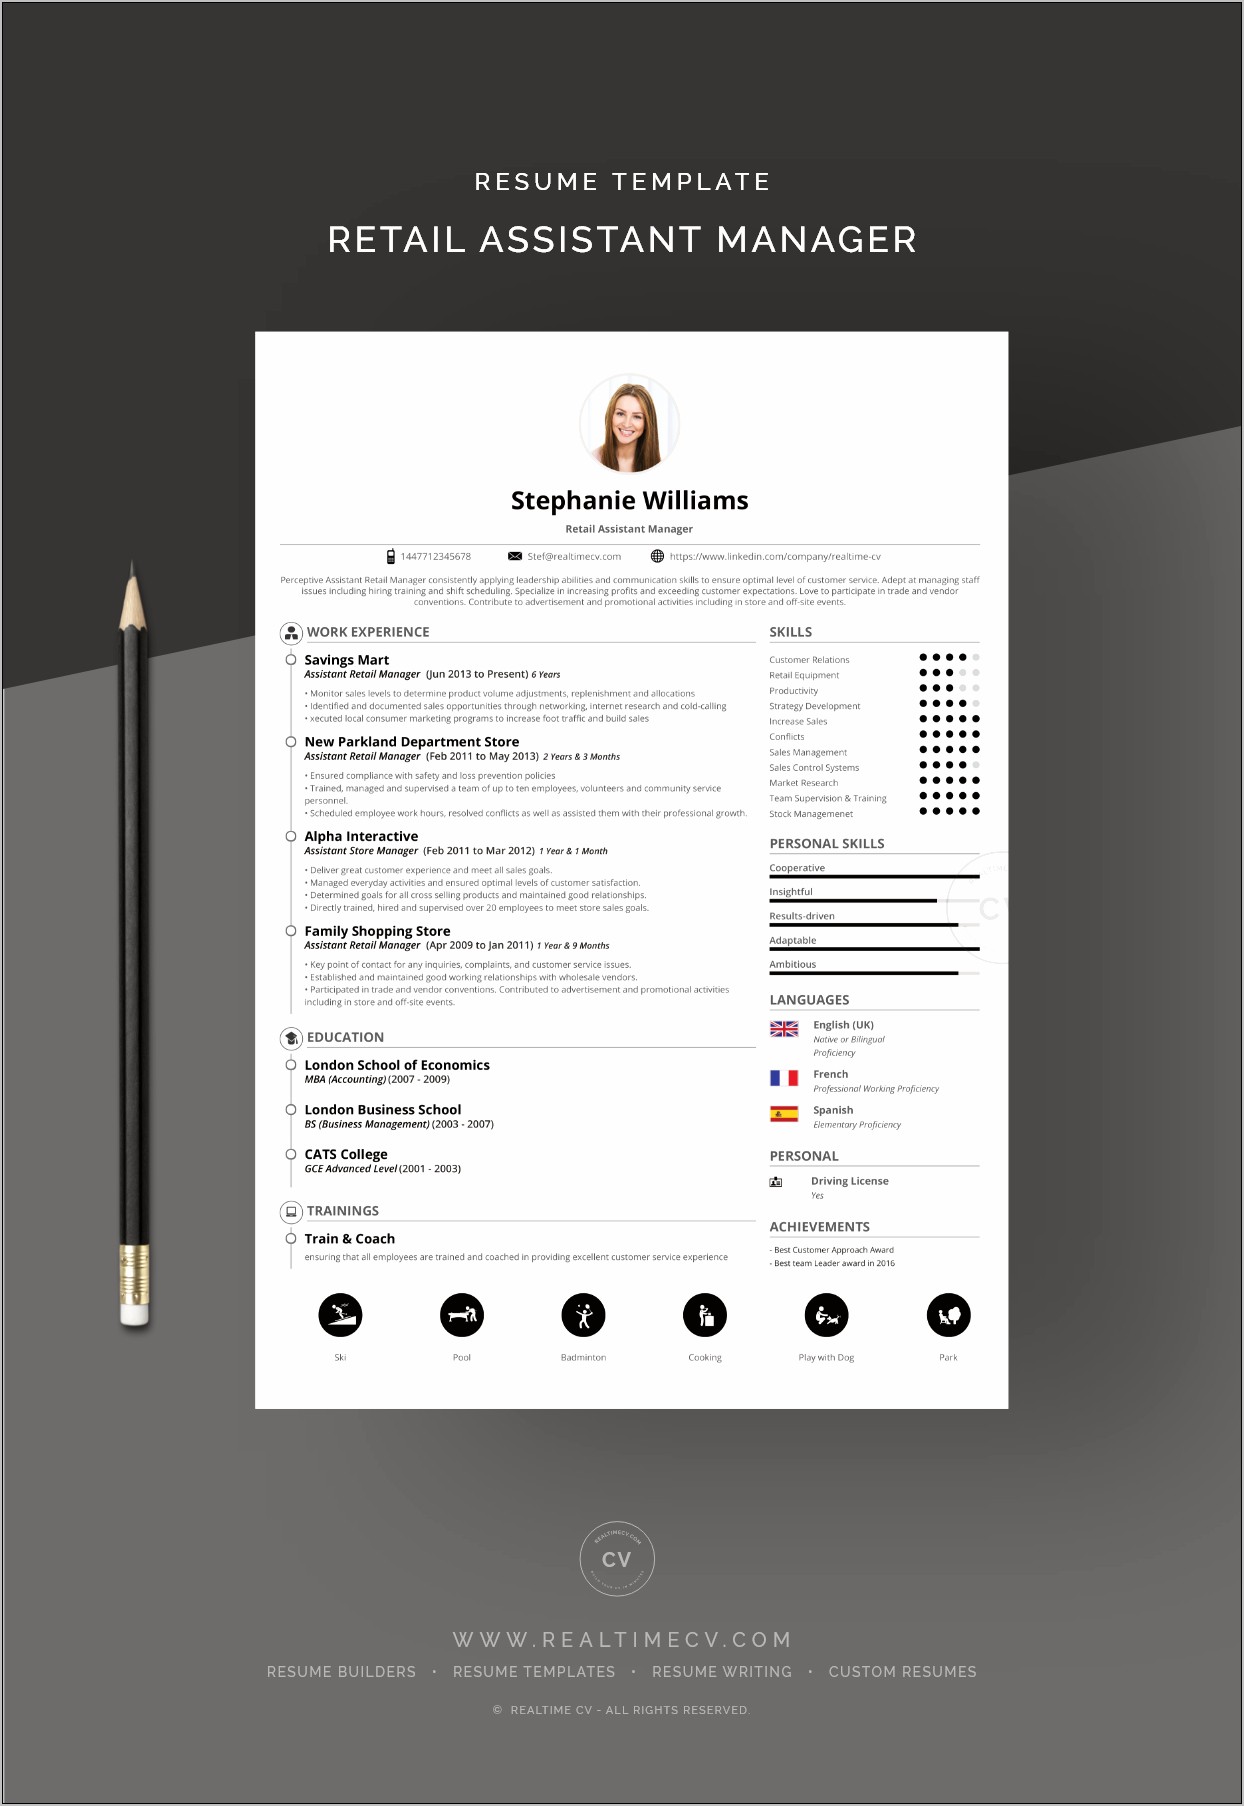 Retail Skills For Resume For Assistant Manager